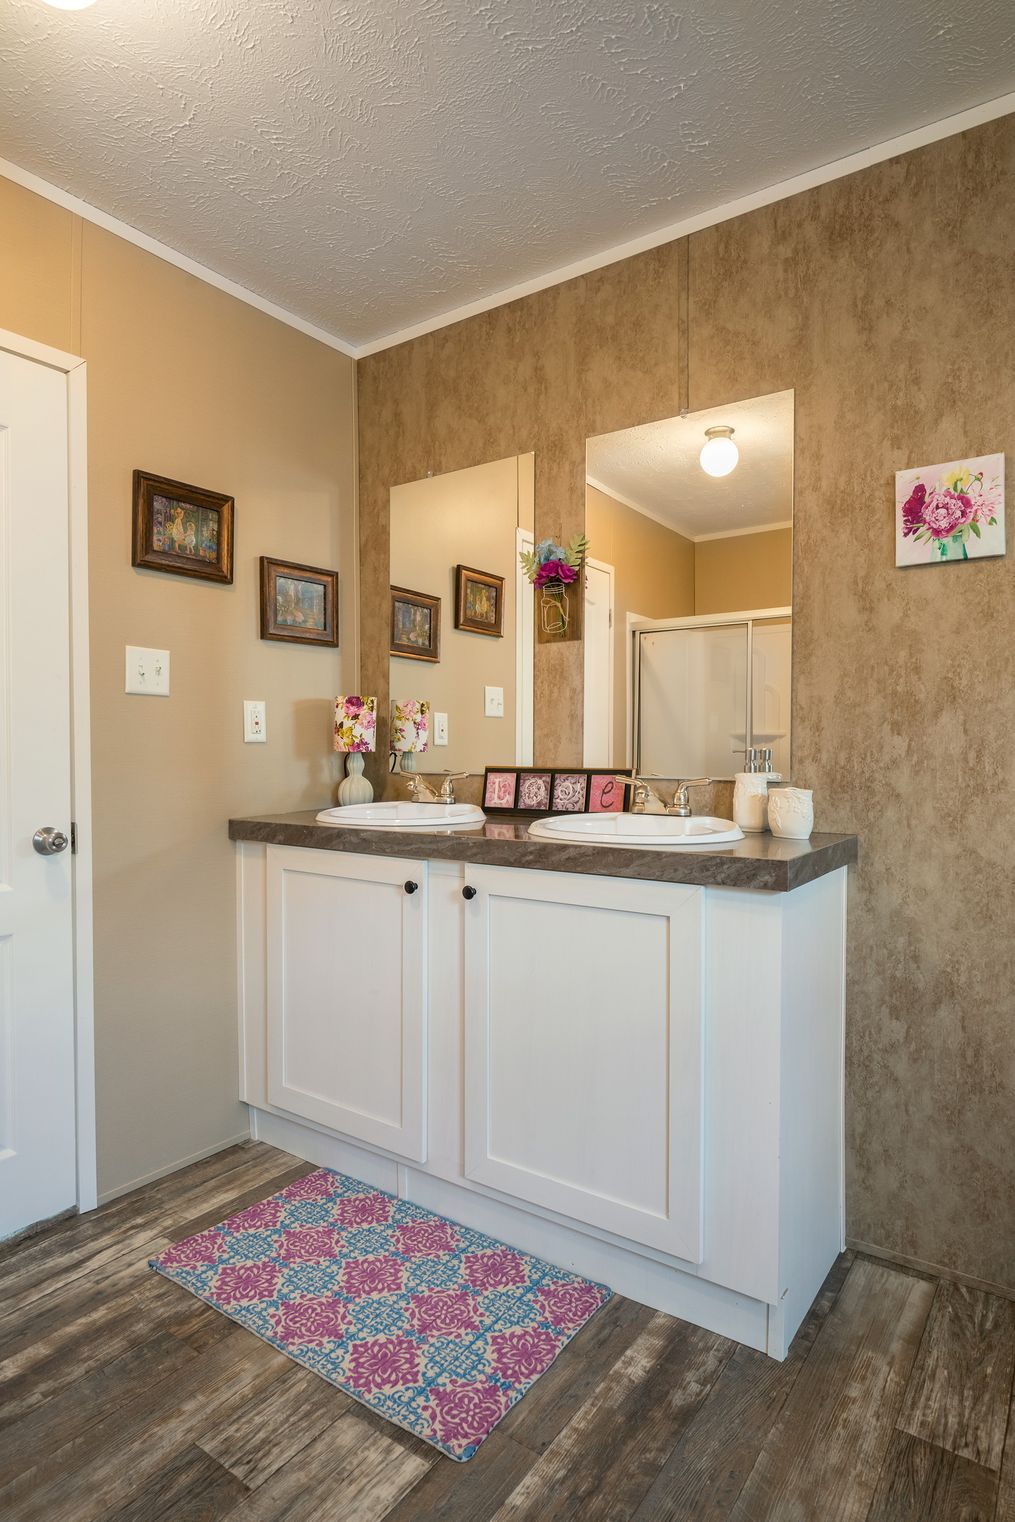 The TRADITION 60B Master Bathroom. This Manufactured Mobile Home features 3 bedrooms and 2 baths.